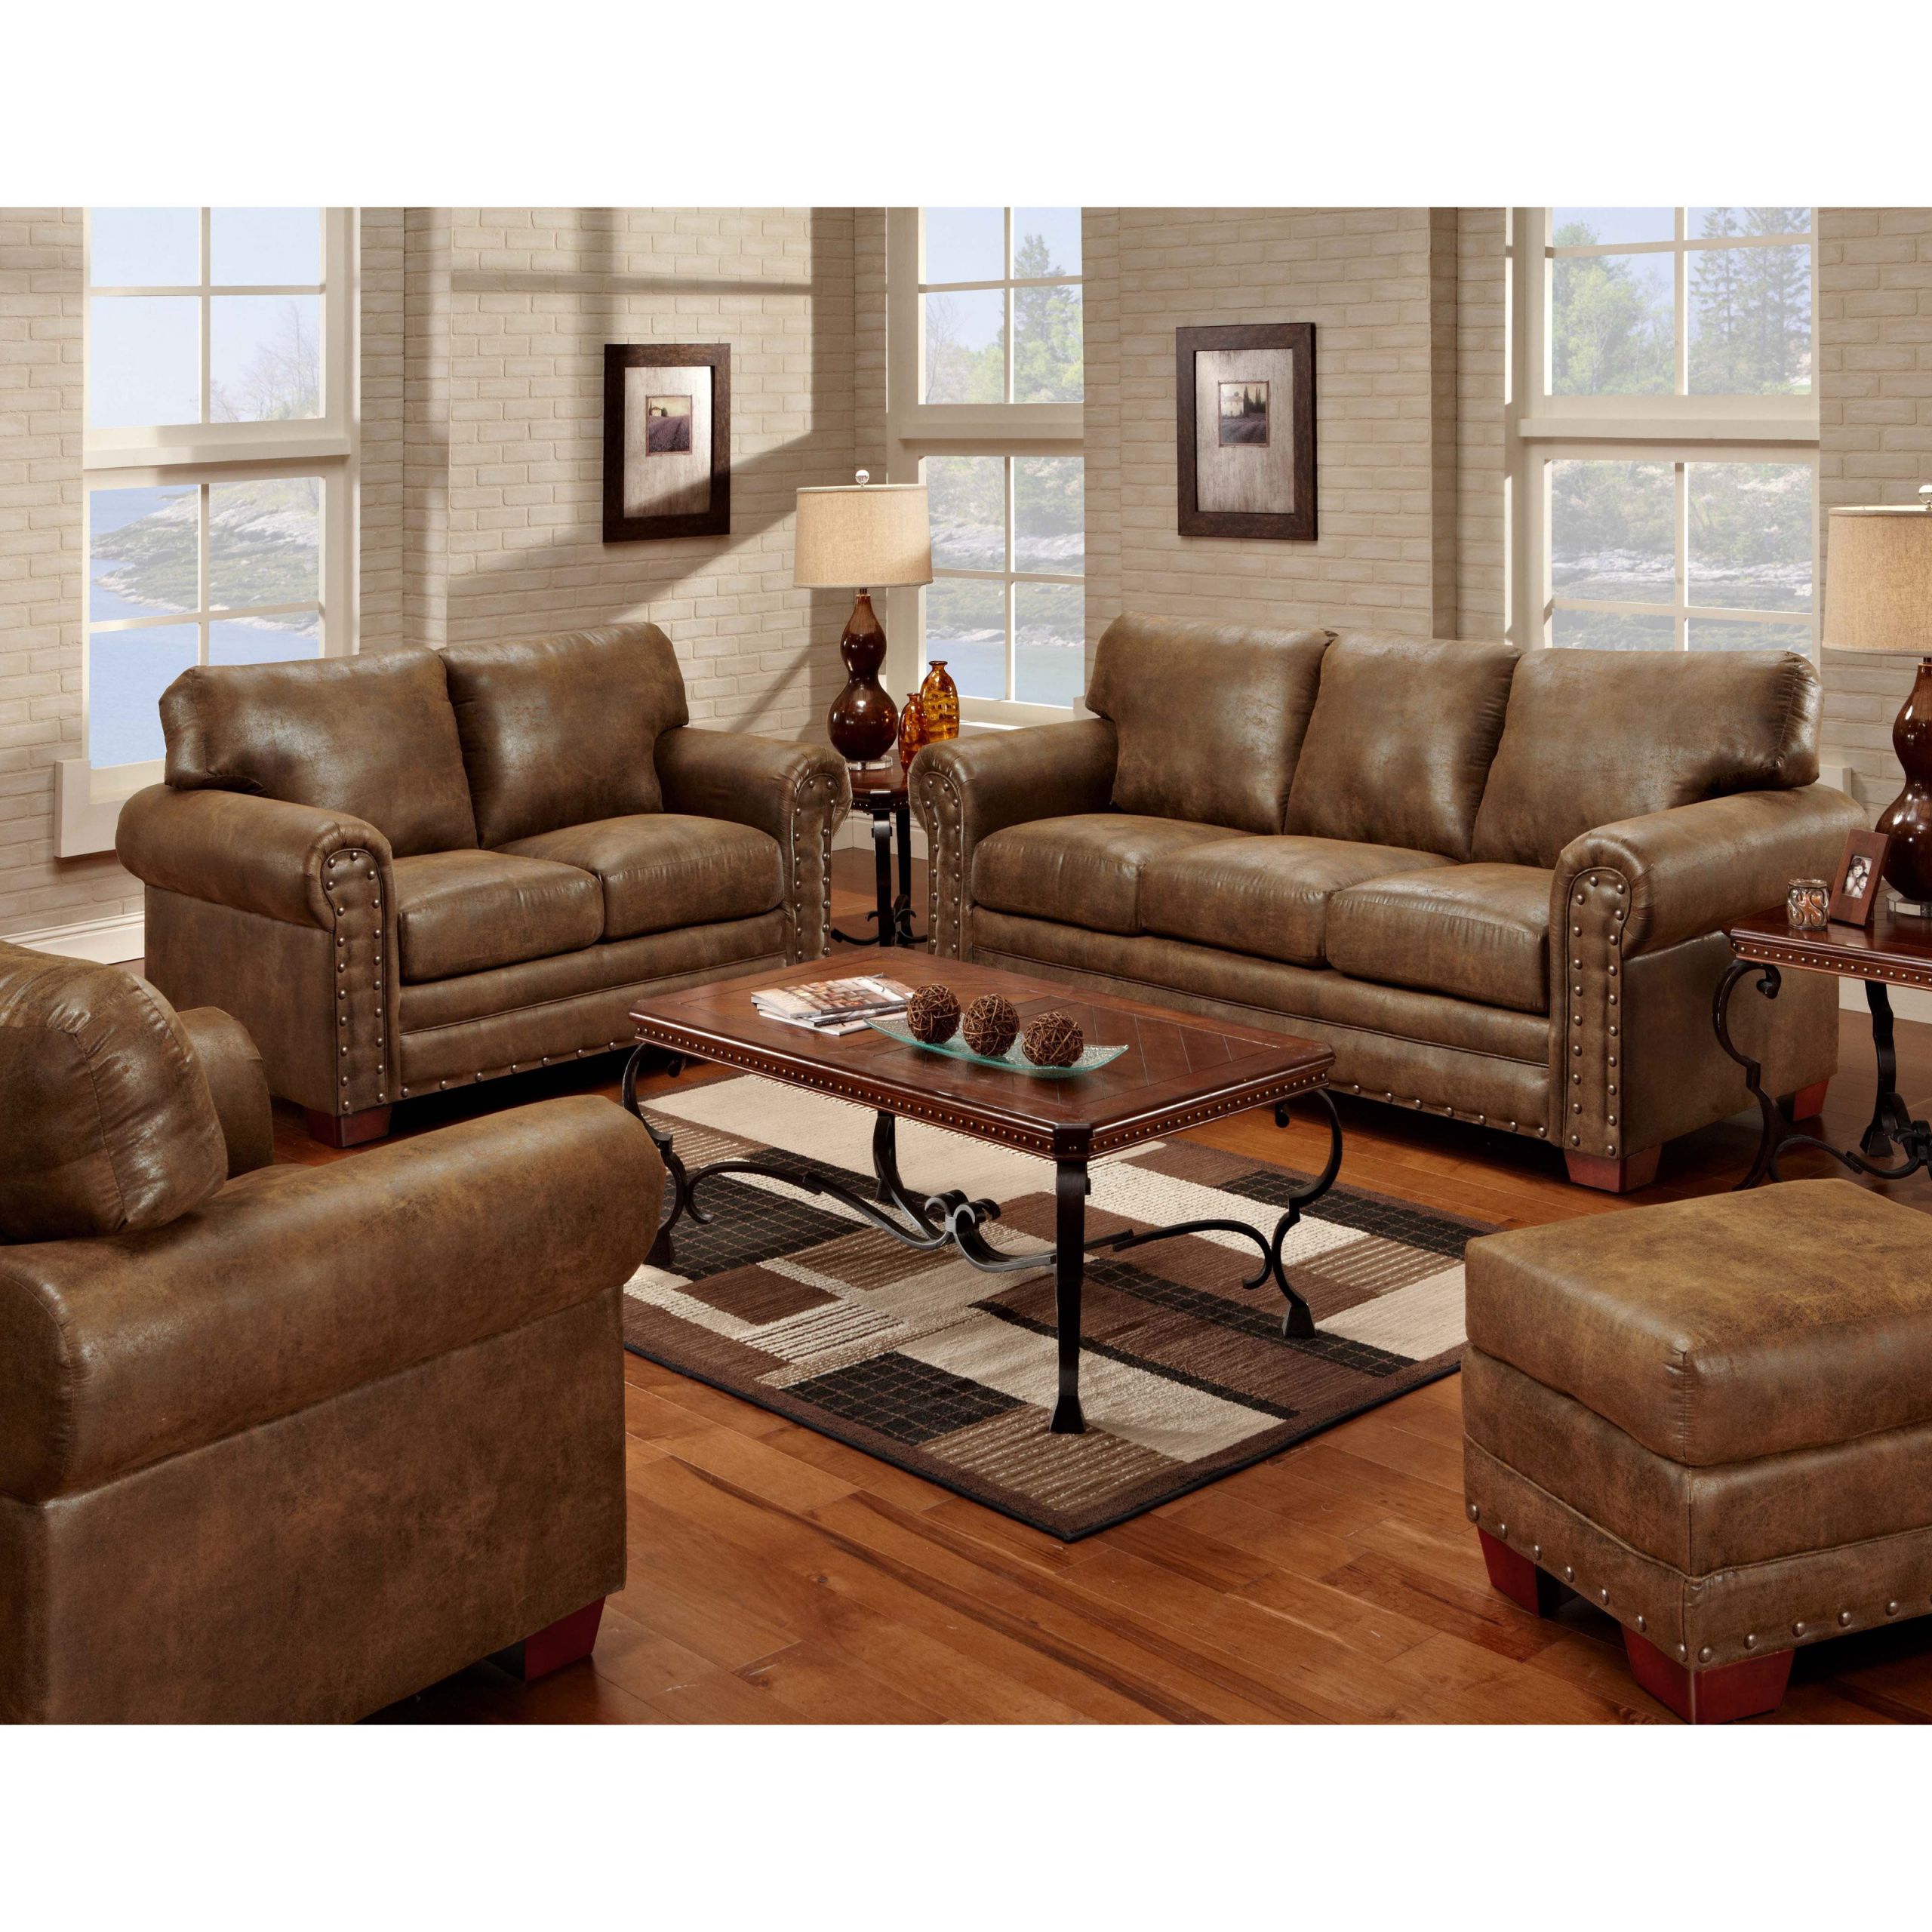 Rustic Living Room Sets
 Outdoor Leisure Products Buckskin 4 Piece Sofa Set Sofas